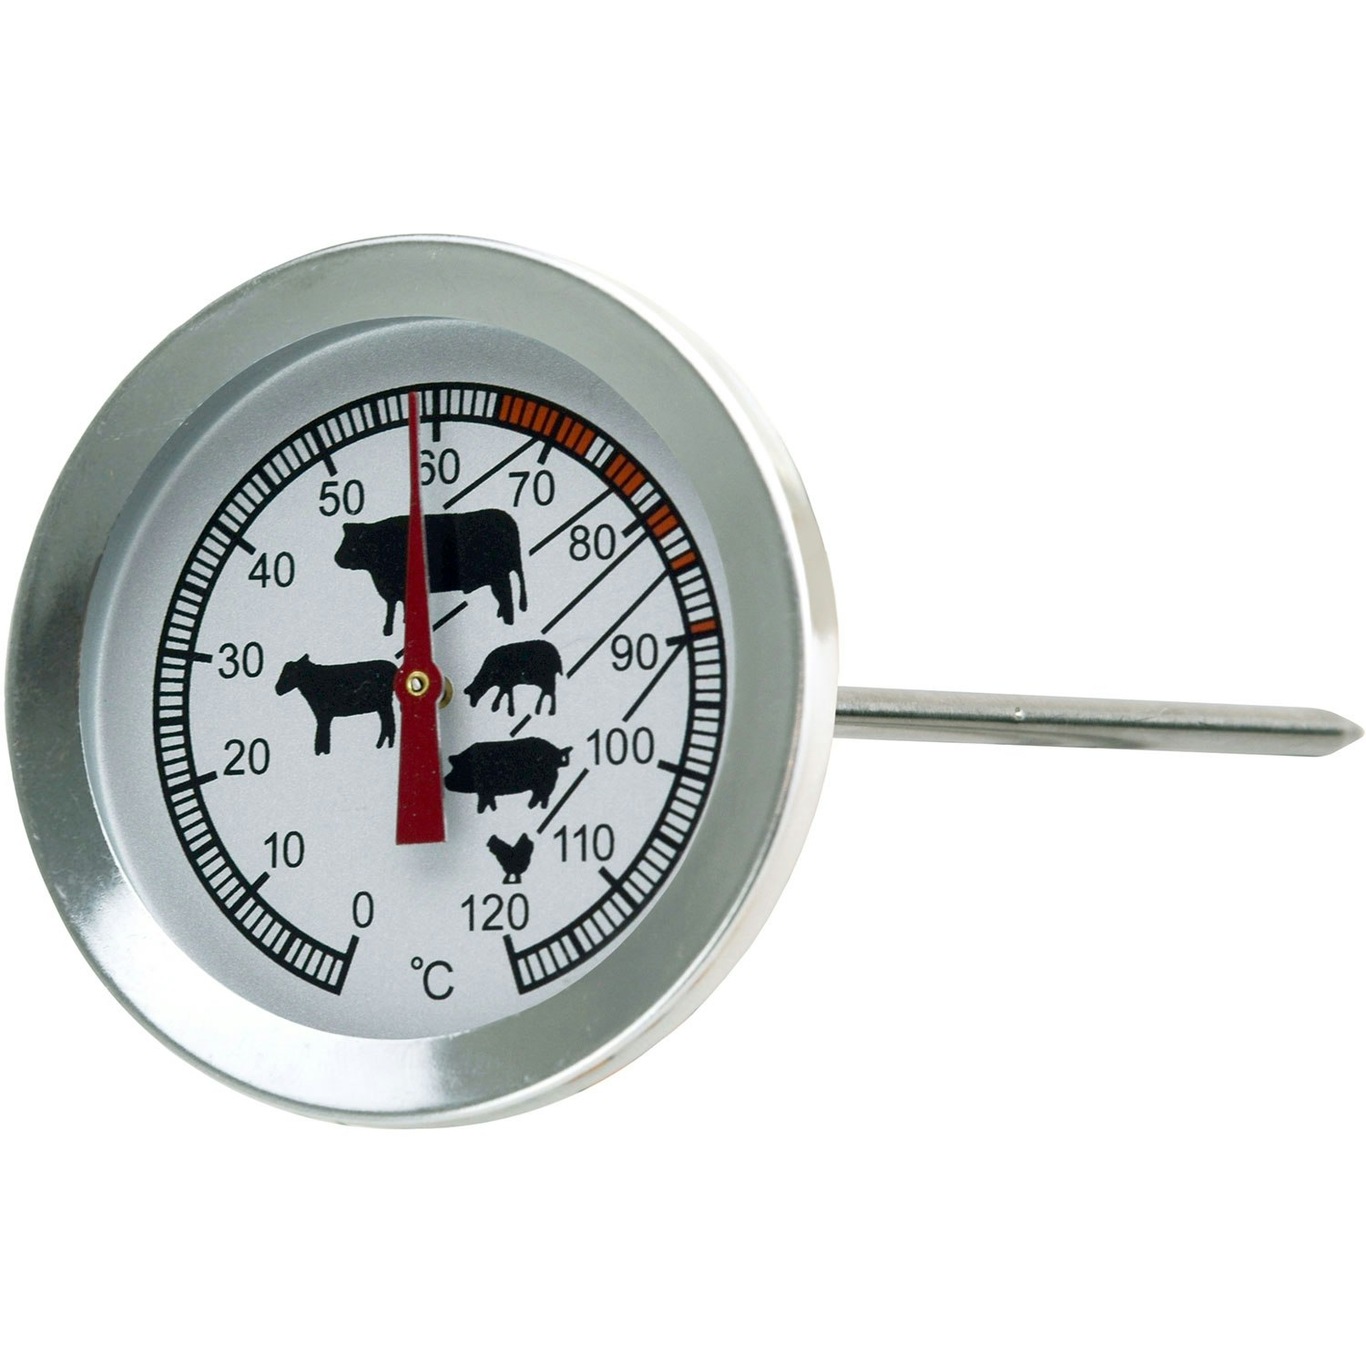 https://royaldesign.com/image/11/eti-meat-thermometer-stainless-steel-0?w=800&quality=80